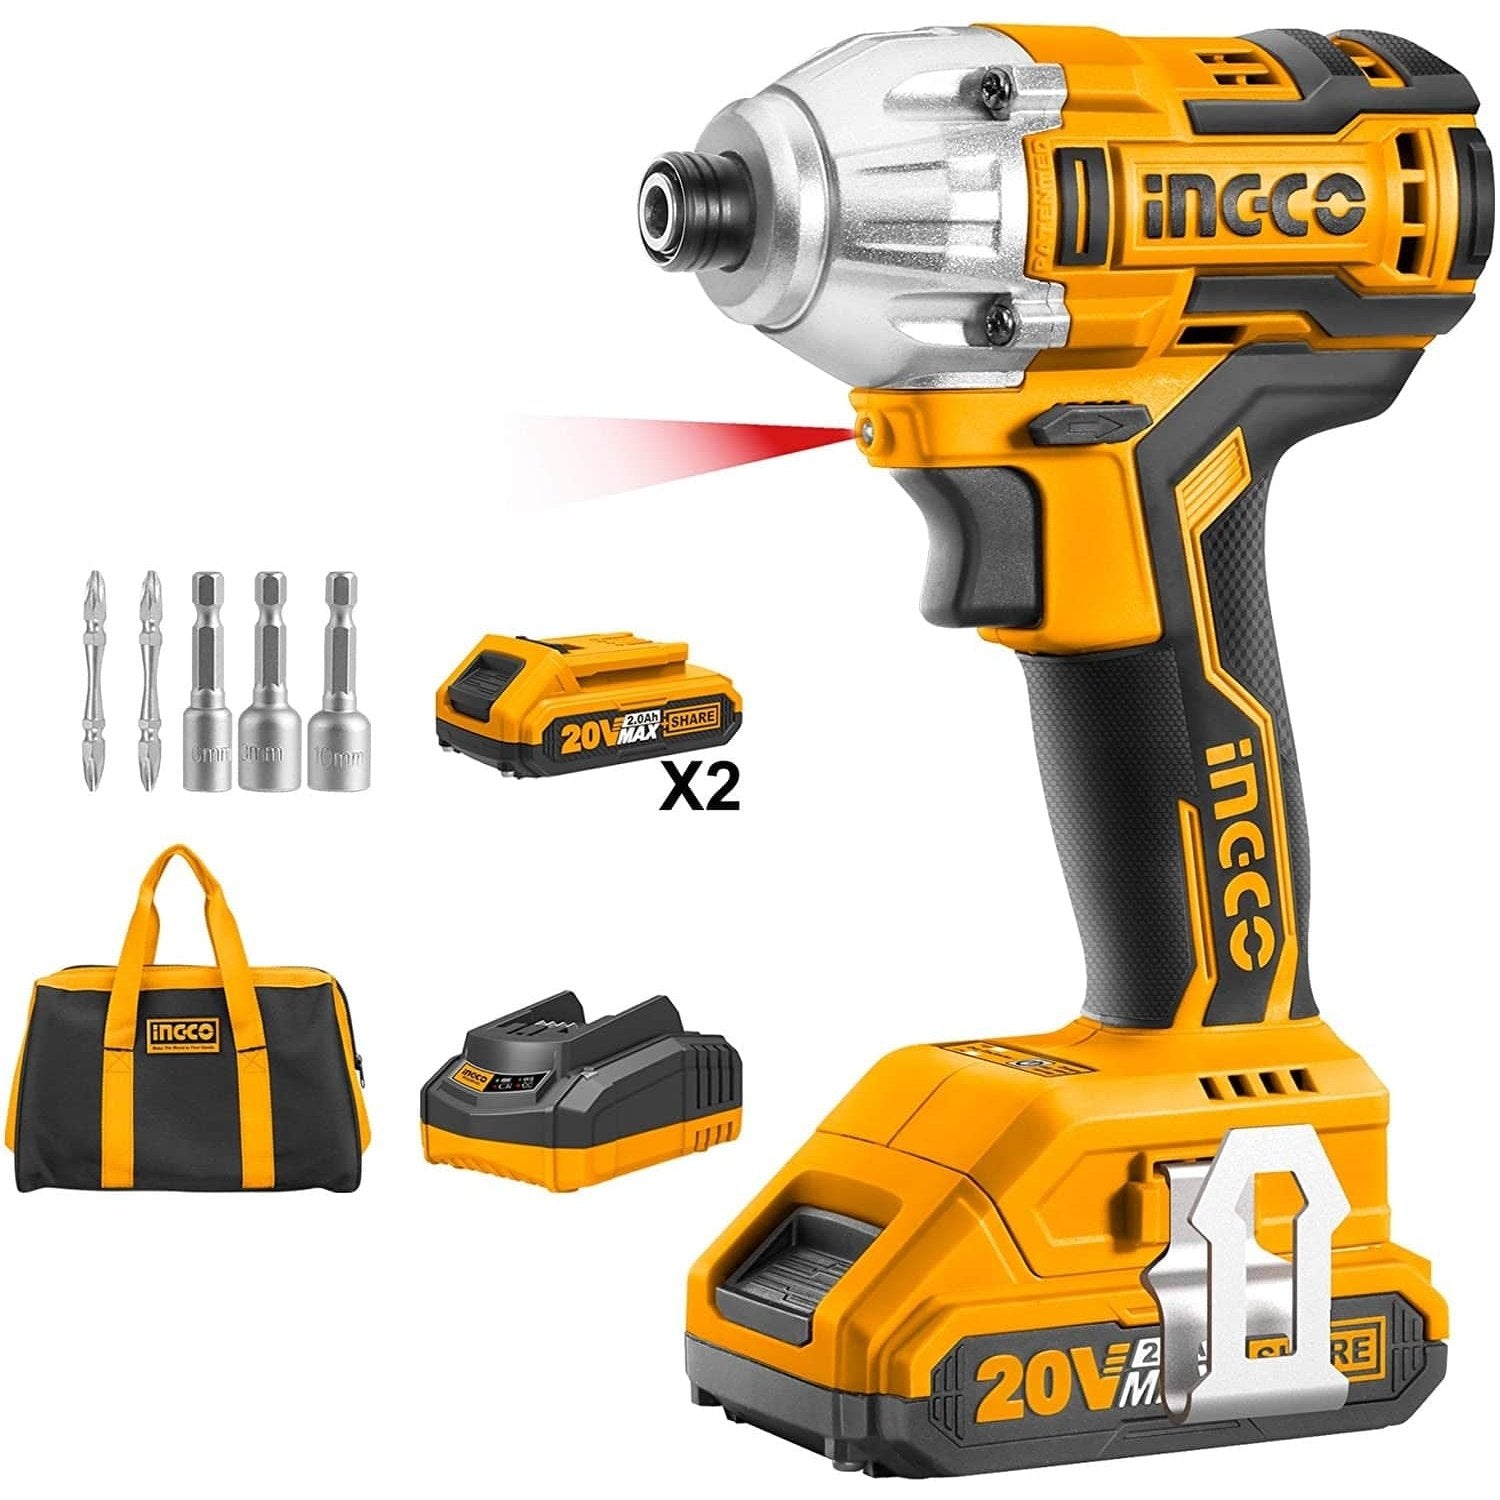 Ingco Lithium-Ion Cordless Impact Driver 20V 2.0Ah - CIRLI2002 | Buy Online in Accra, Ghana - Supply Master Impact Wrench & Driver Buy Tools hardware Building materials